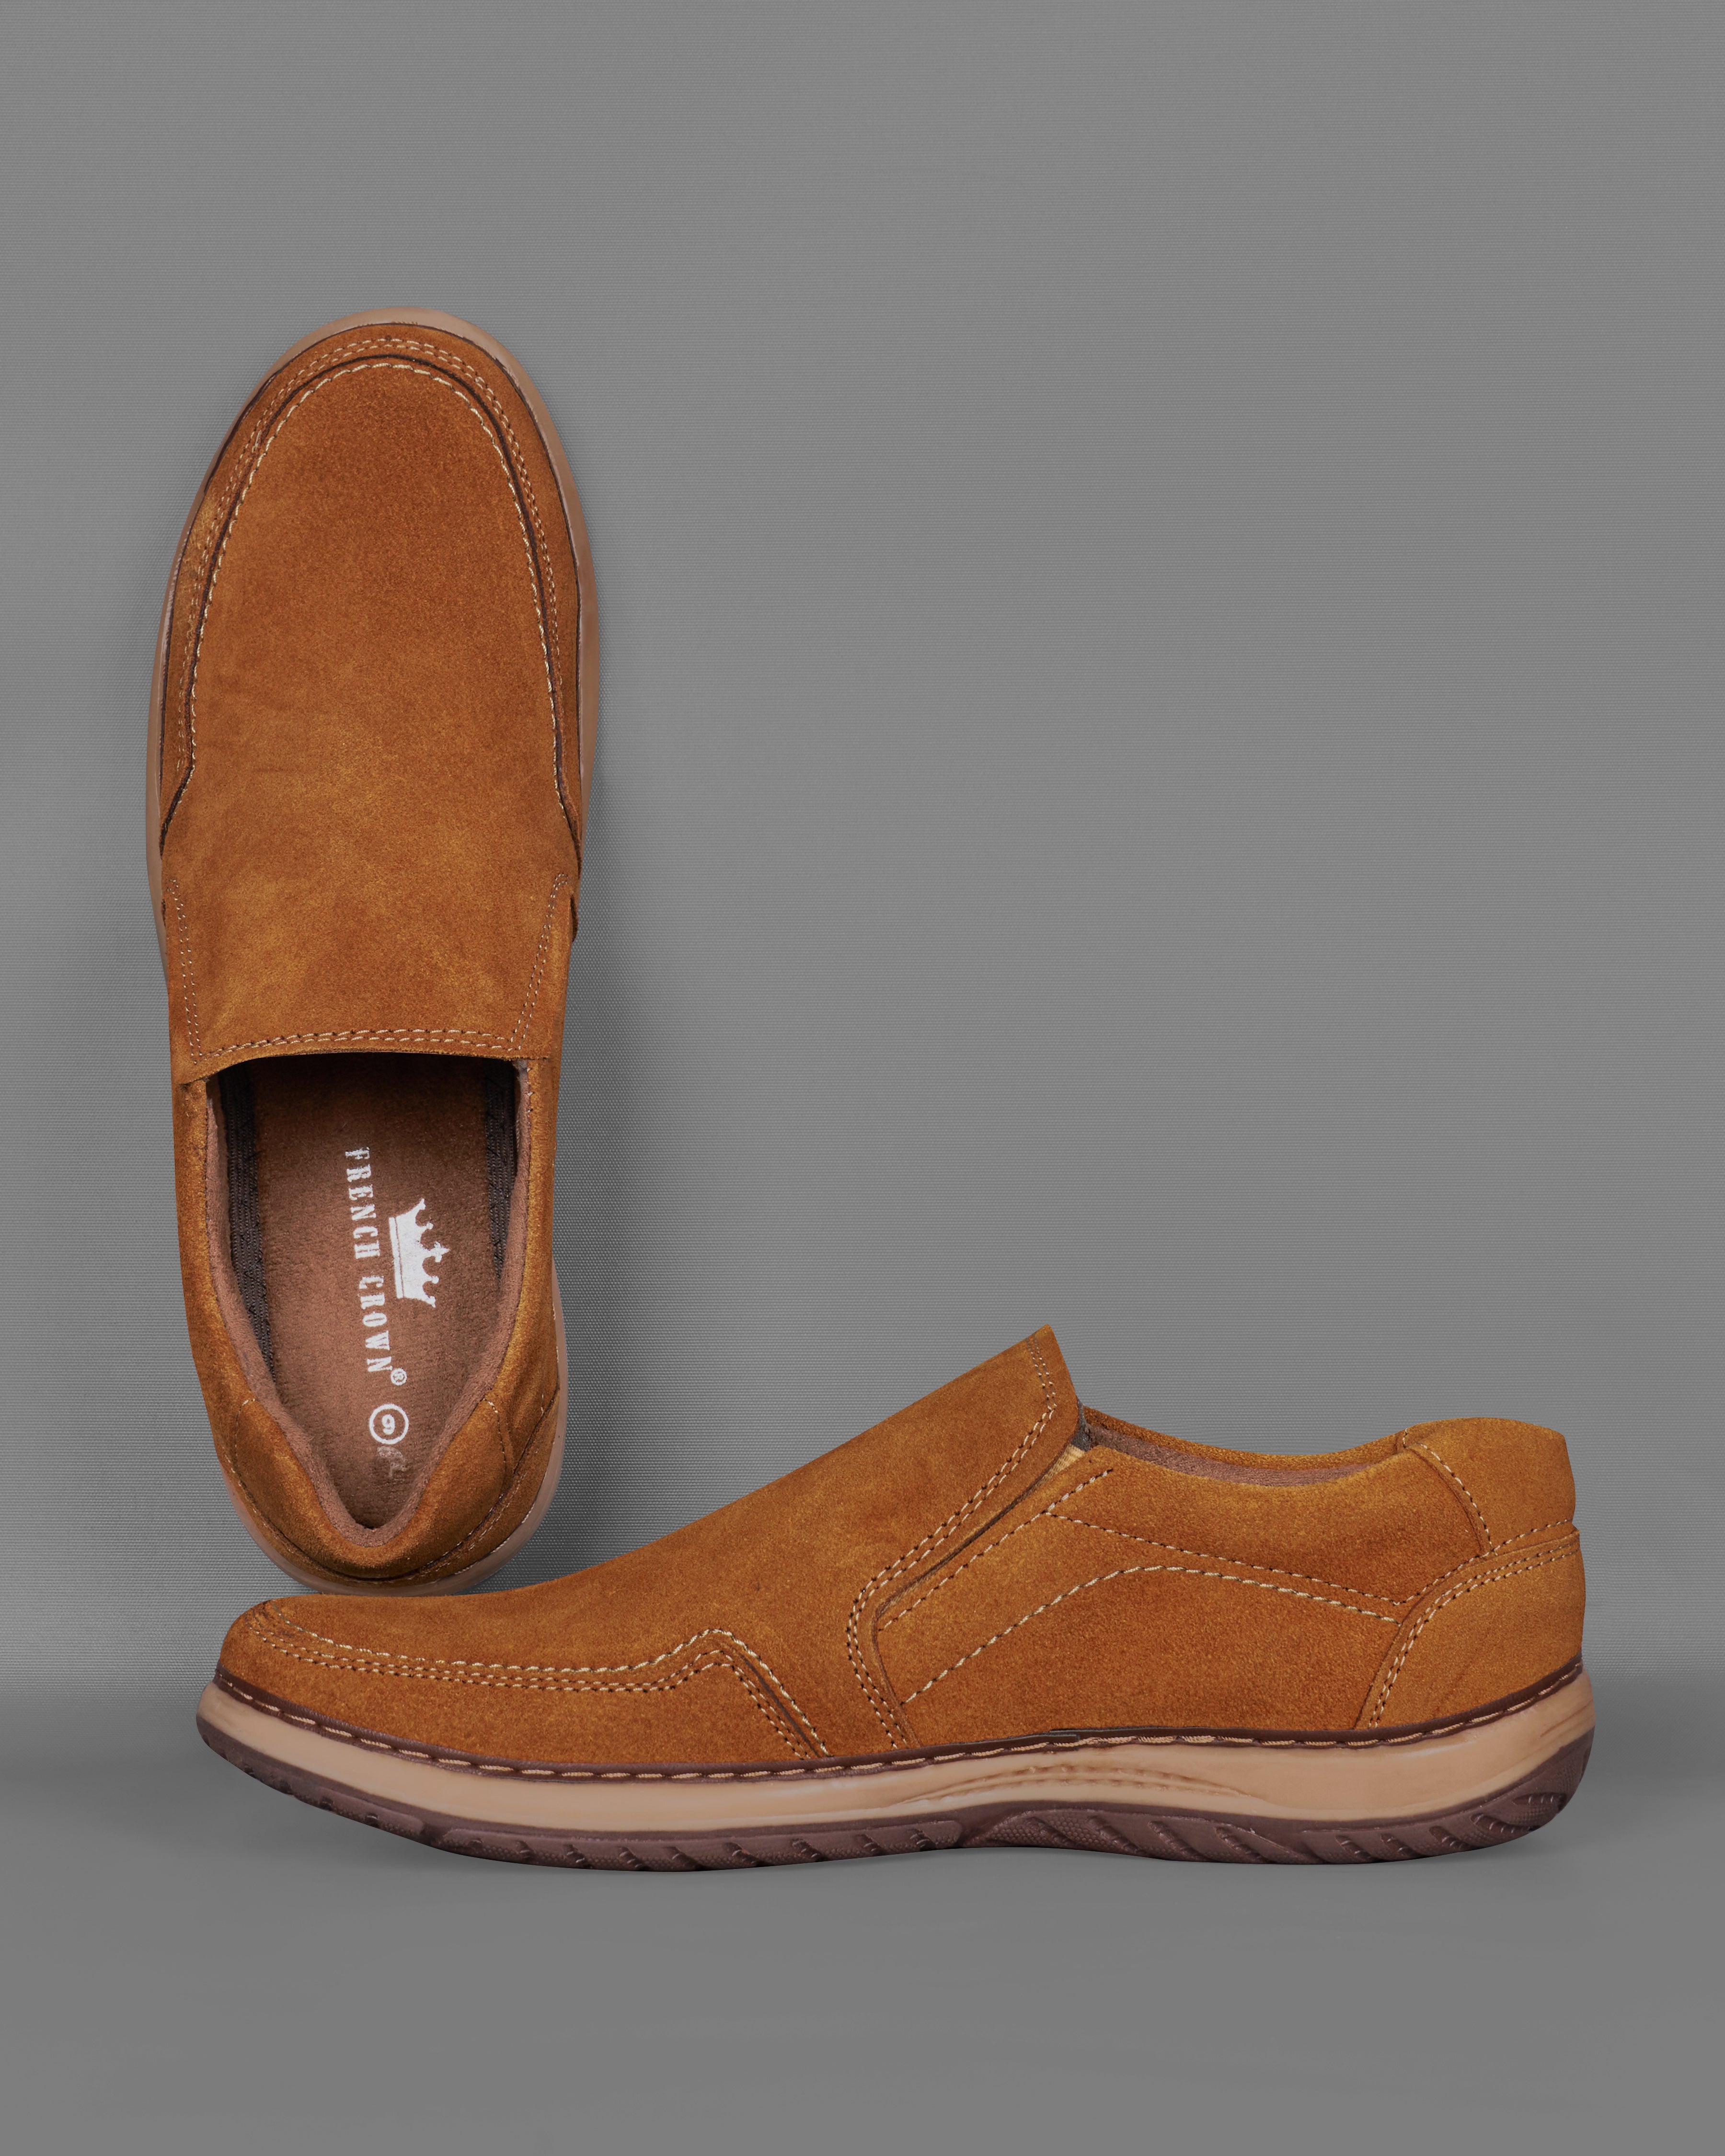 Copper Brown Slip On Suede leather Shoes FT078-6, FT078-7, FT078-8, FT078-9, FT078-10, FT078-11